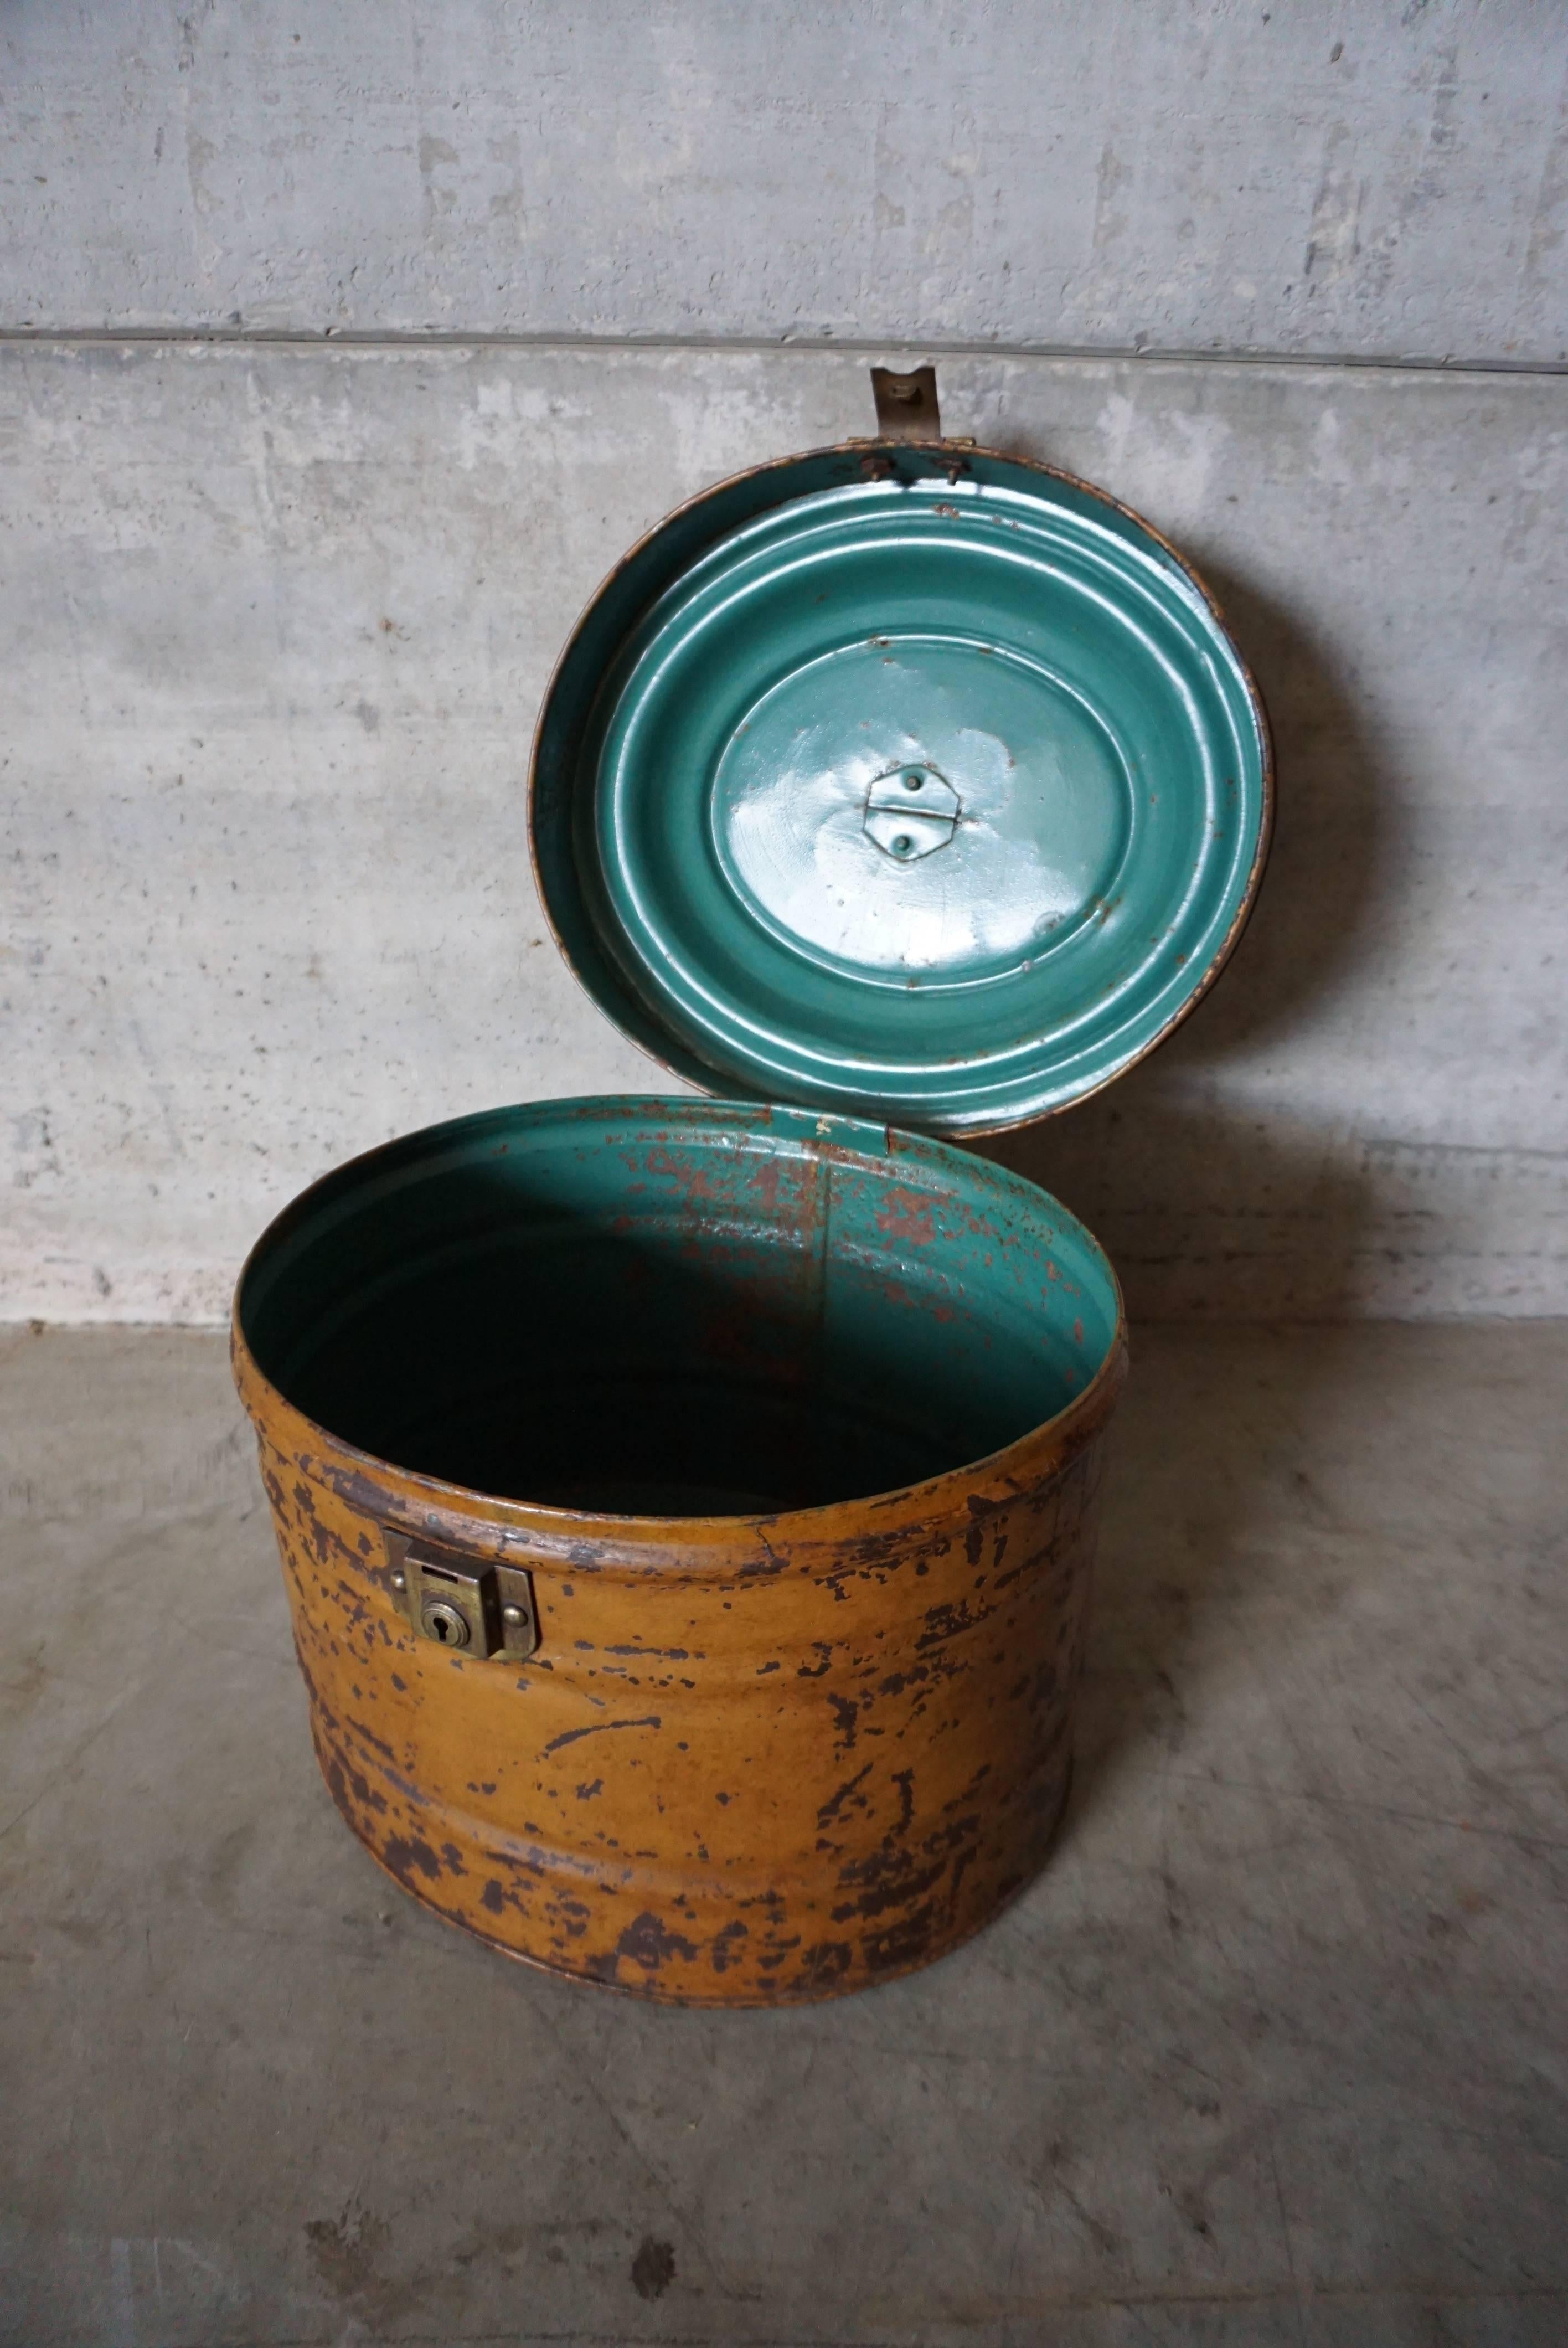 Storage tin with brass elements from the early 20th century. The outside has a nice patinated ochre color while the inside is more aquamarine.